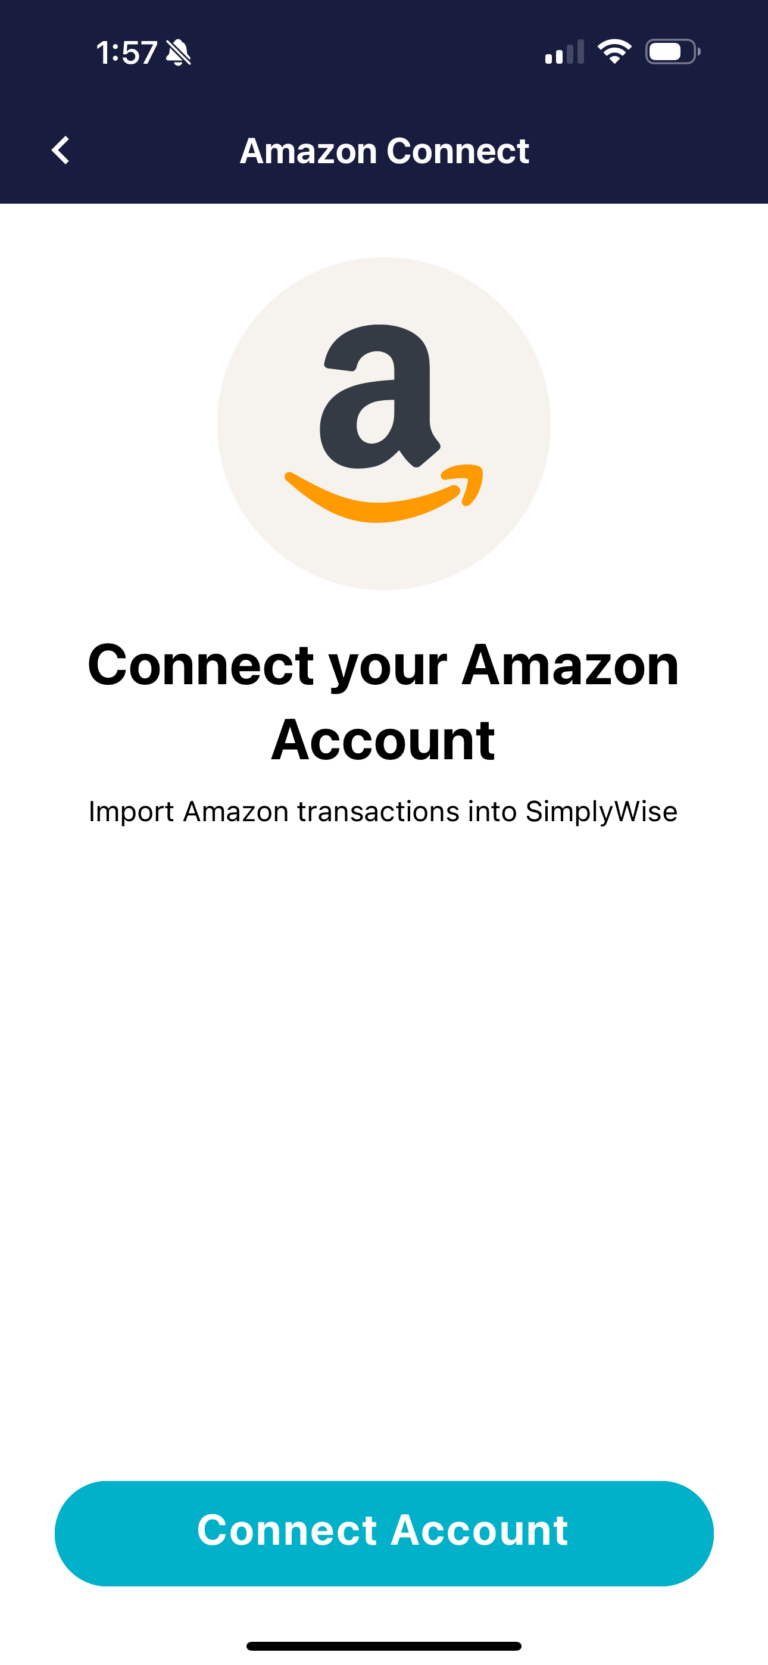 Connect Amazon to SimplyWise